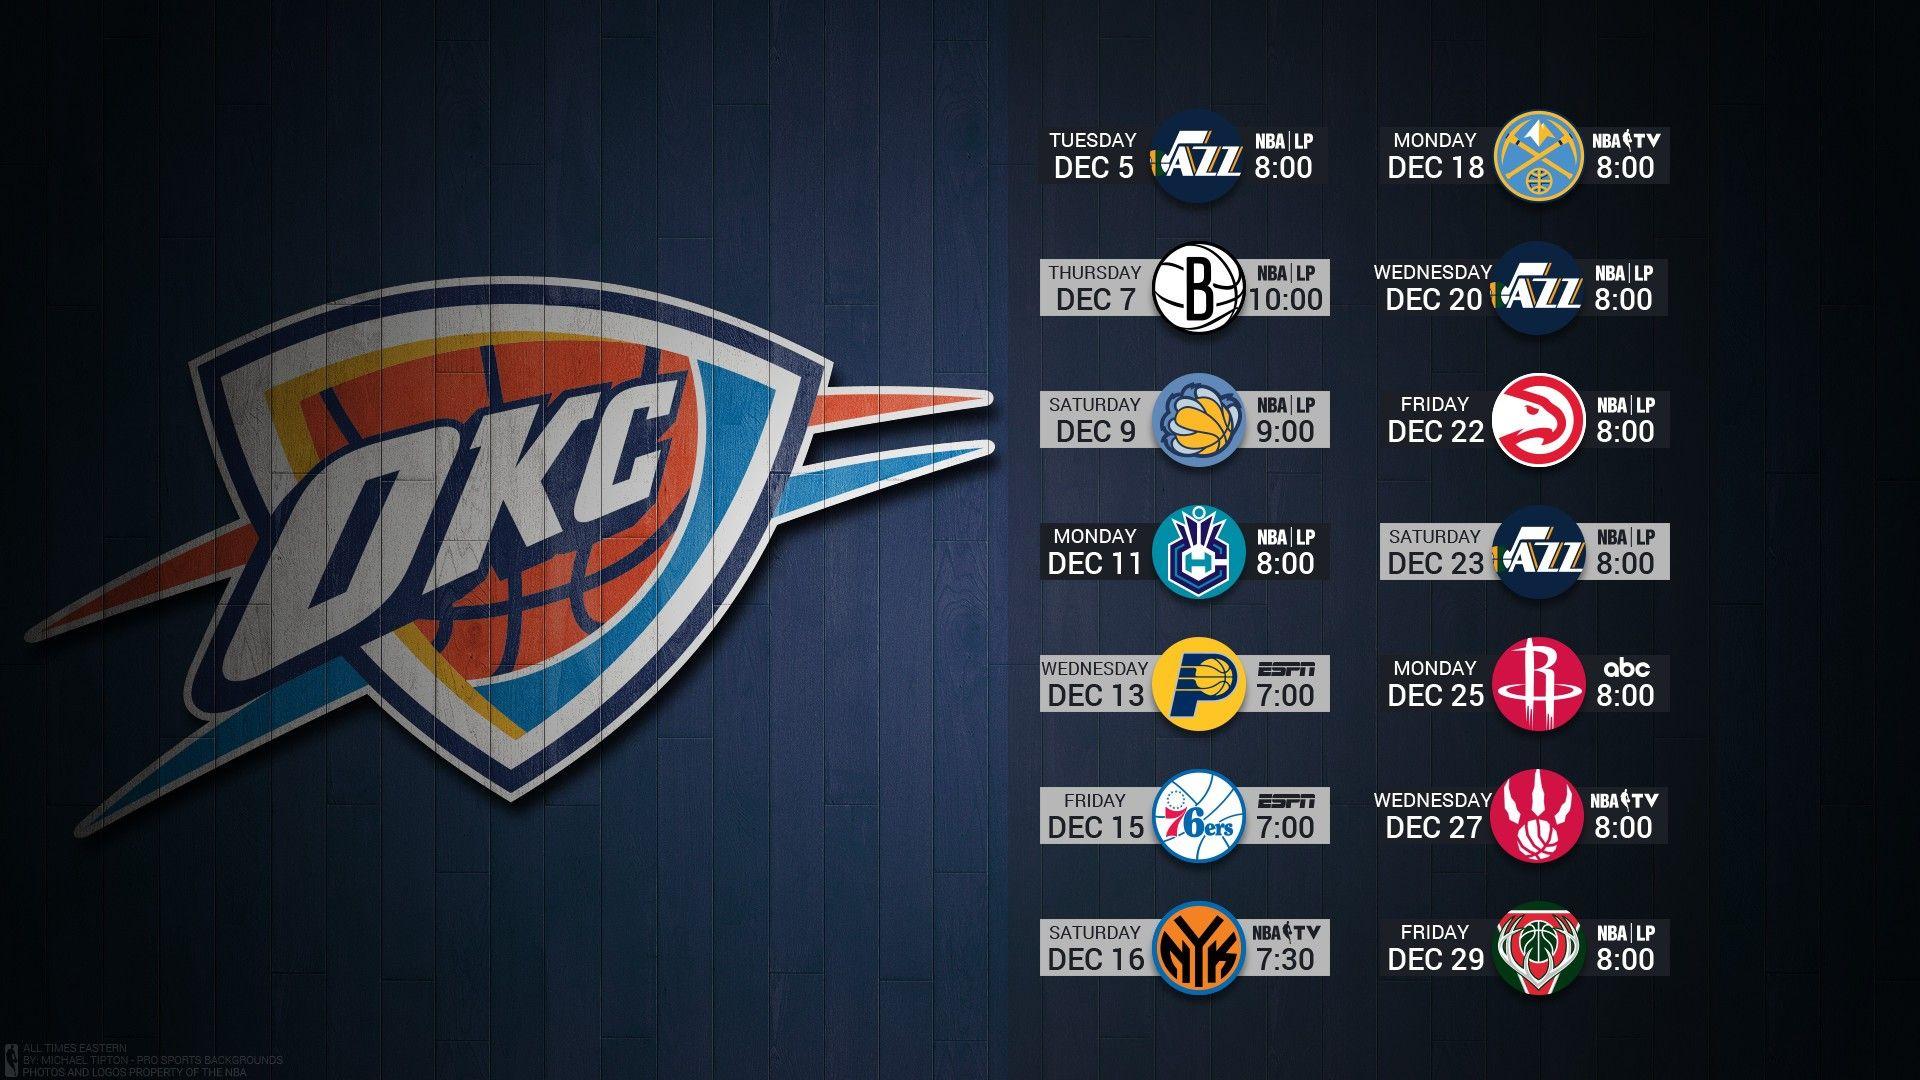 Oklahoma City Thunder Wallpaper HD 62 pictures